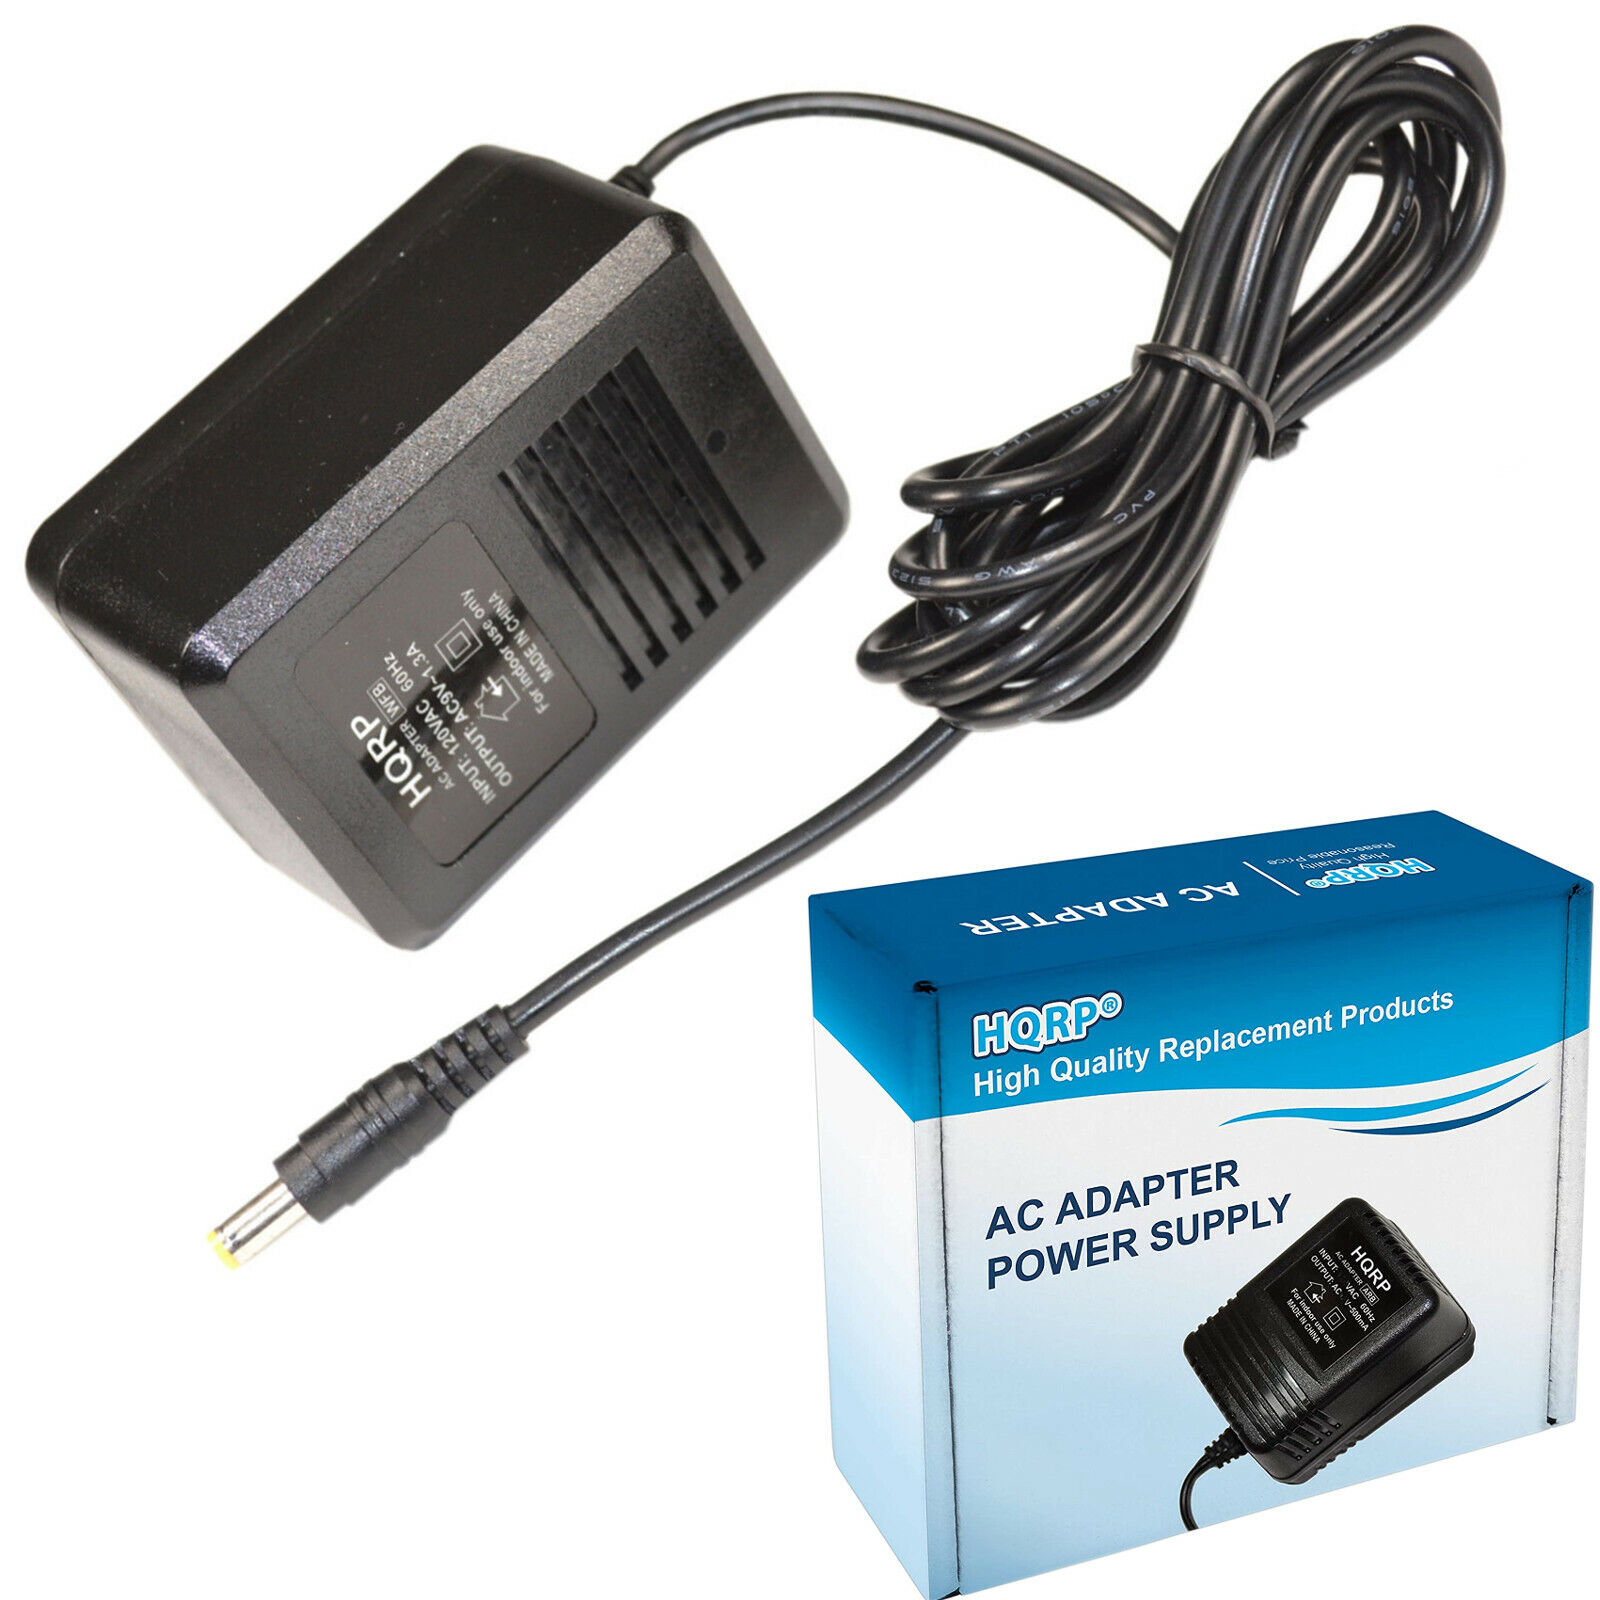 AC Adapter OFFicial for Digitech RPx400 RP300 Classic RP100 RP10 RP1000 S400 S100